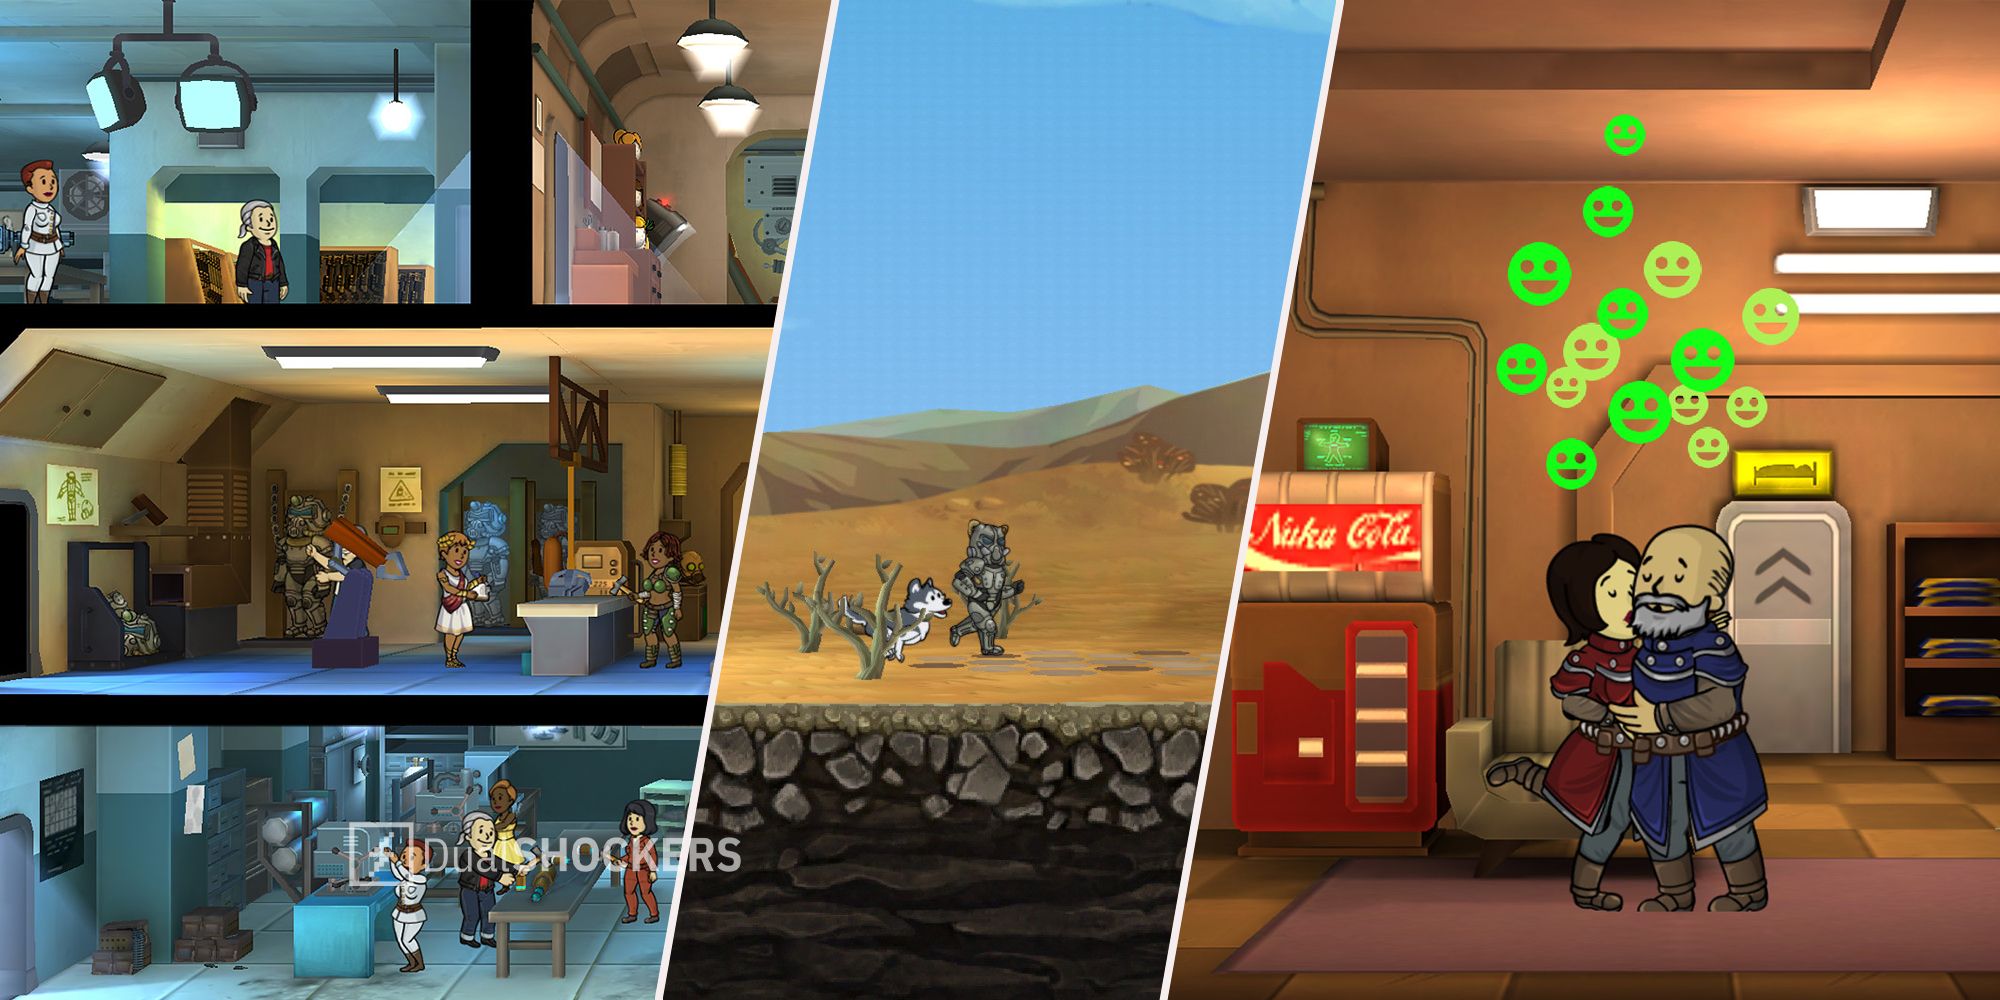 Fallout Shelter gameplay and power armor